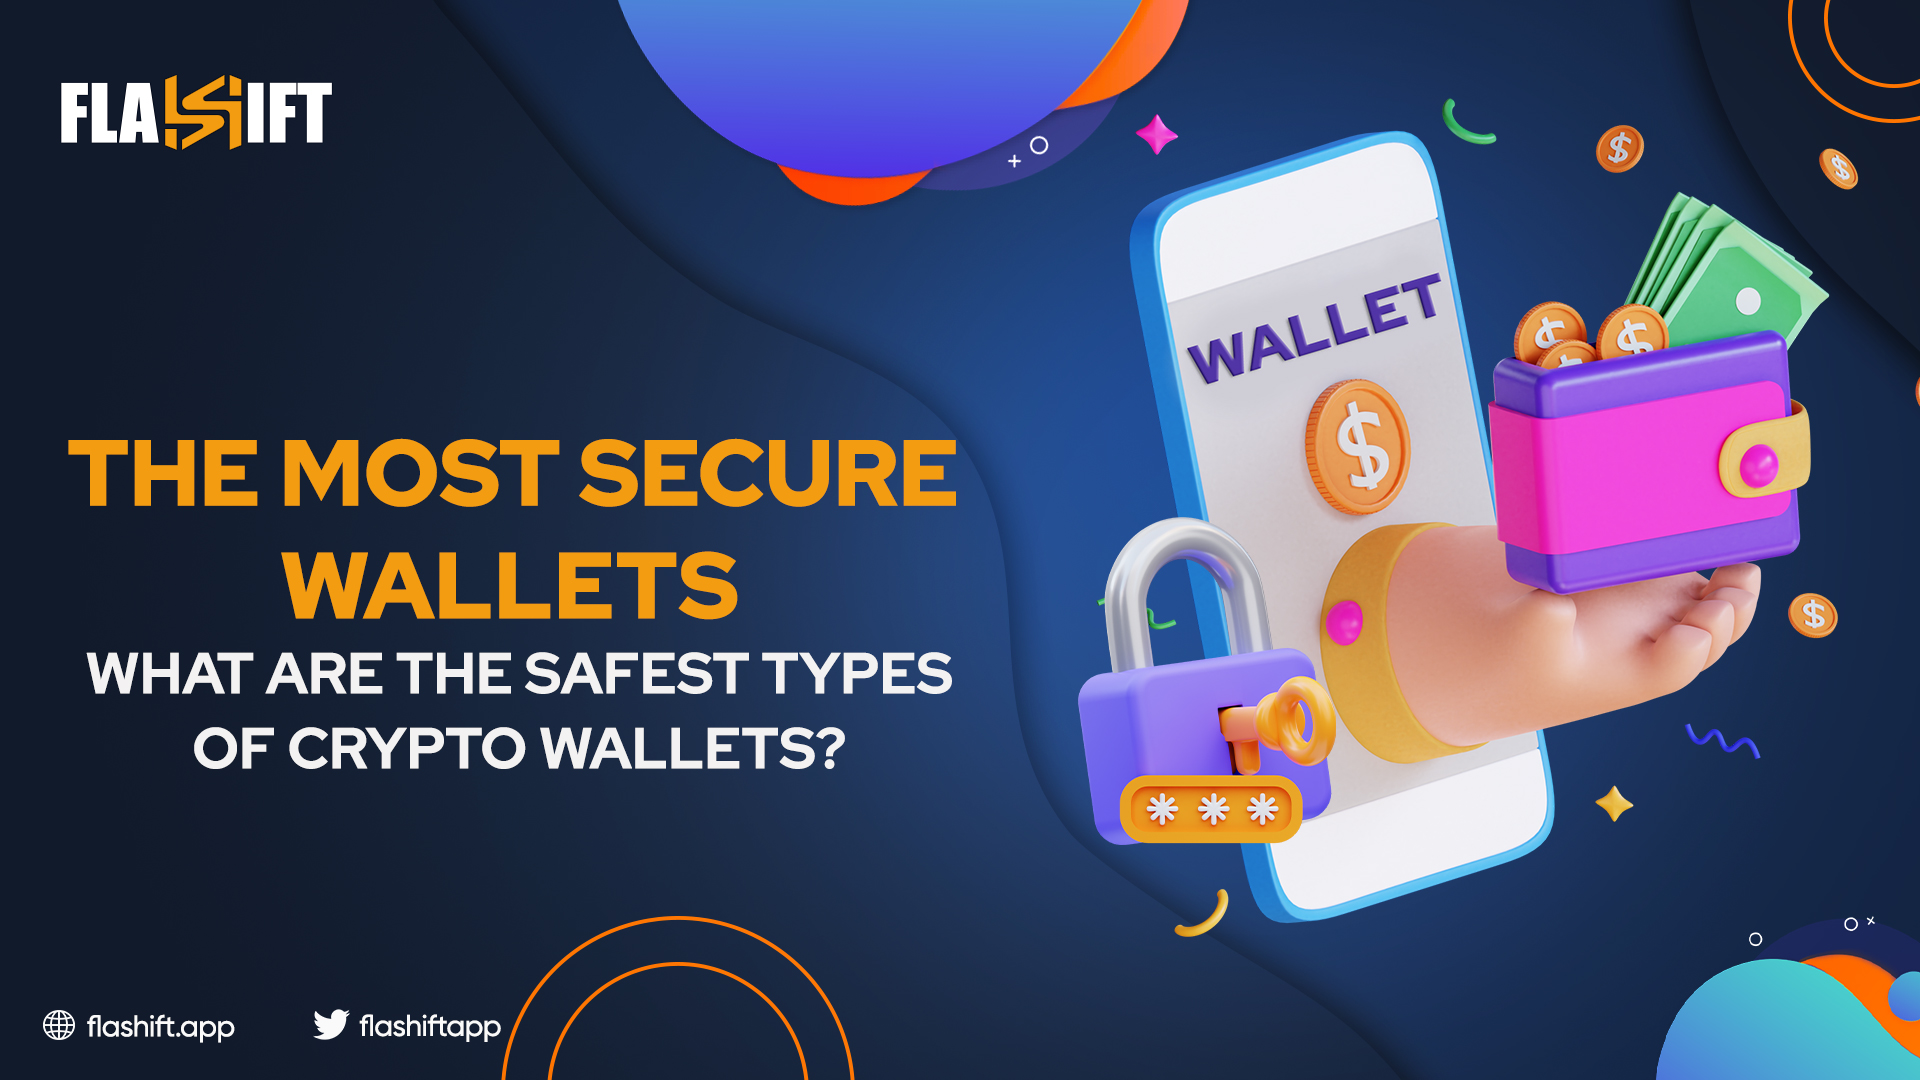 The most secure crypto wallets